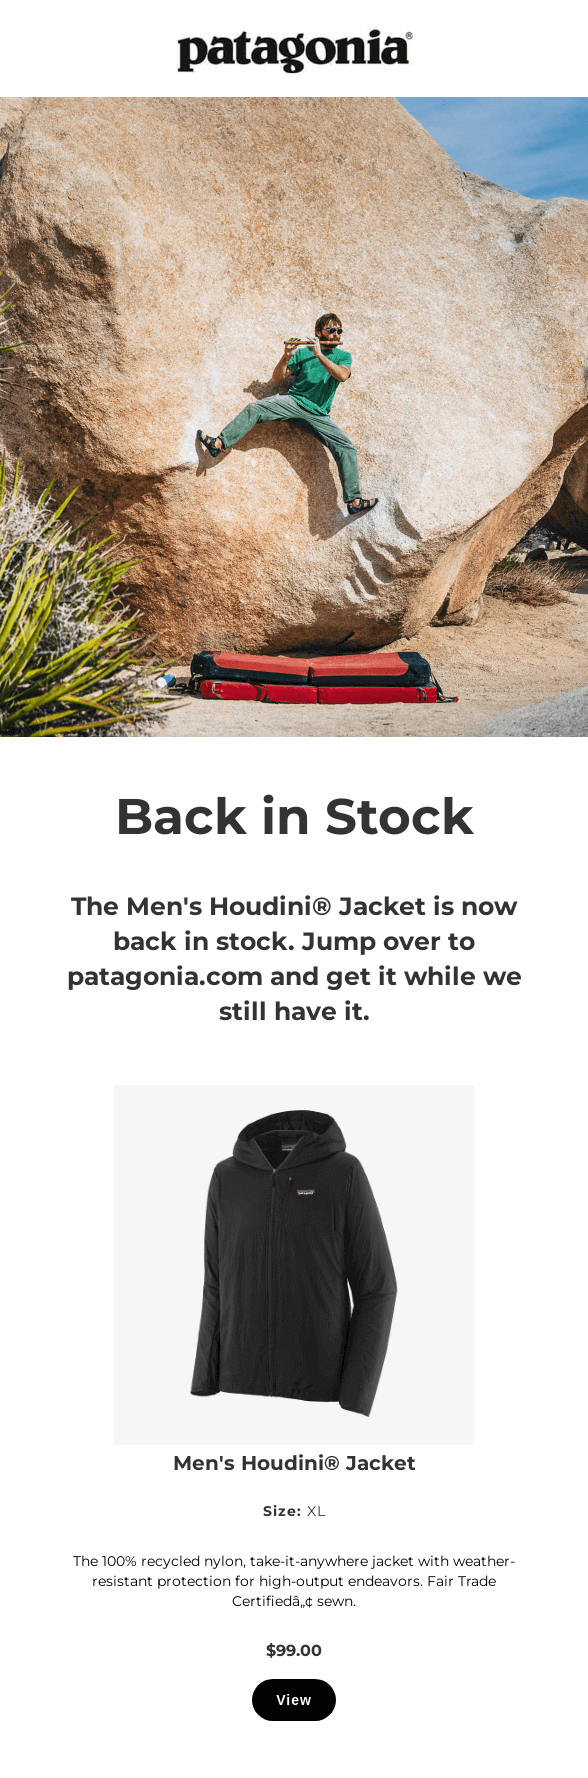 Patagonia notifies the subscriber that a men's black jacket, made from 100% recycled nylon with weather-resistant protection, is now back in stock.